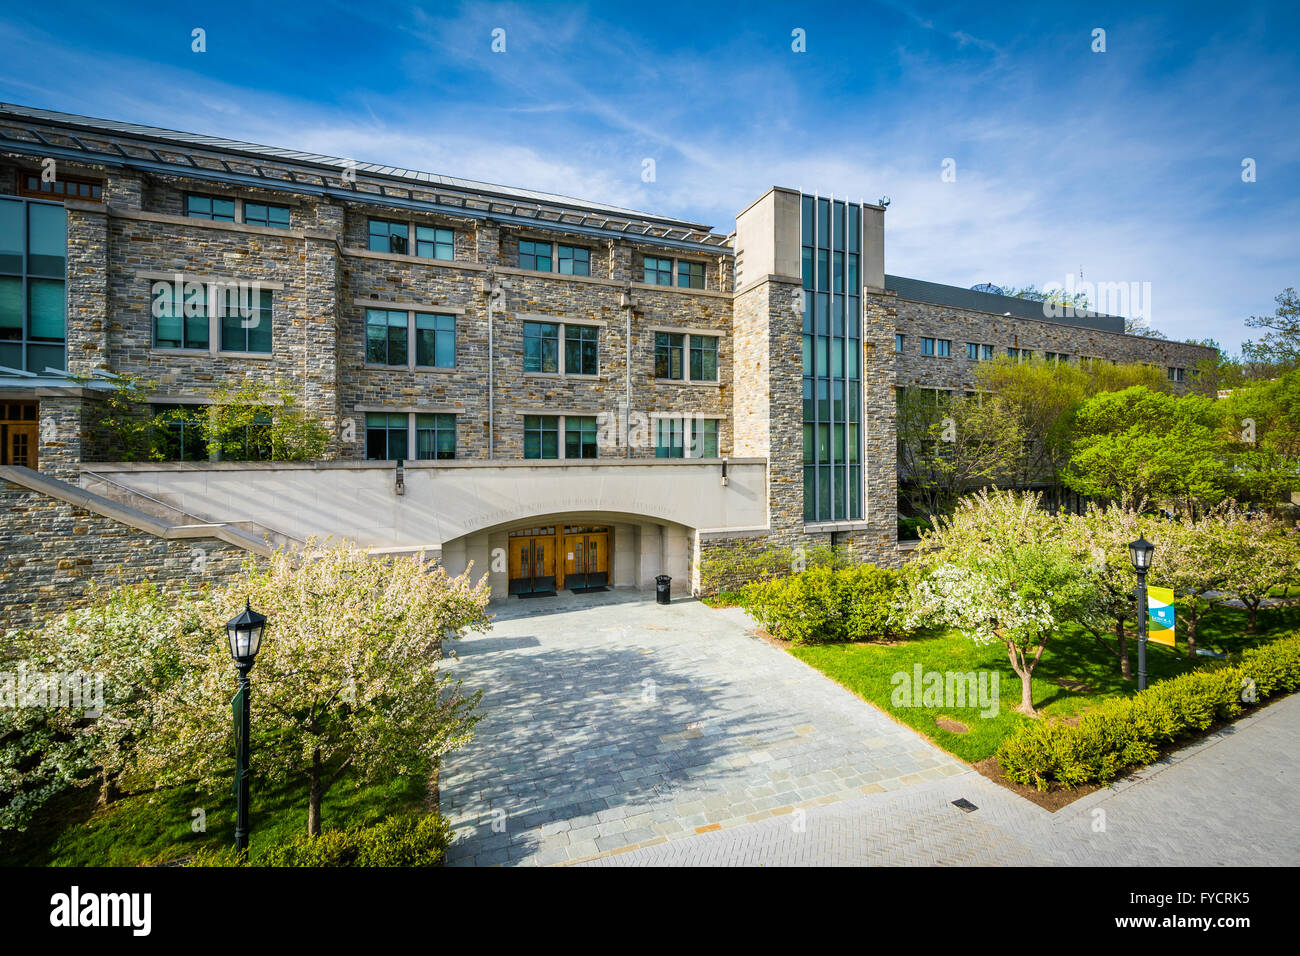 Building and walkways at Loyola University Maryland, in Baltimore, Maryland. Stock Photo